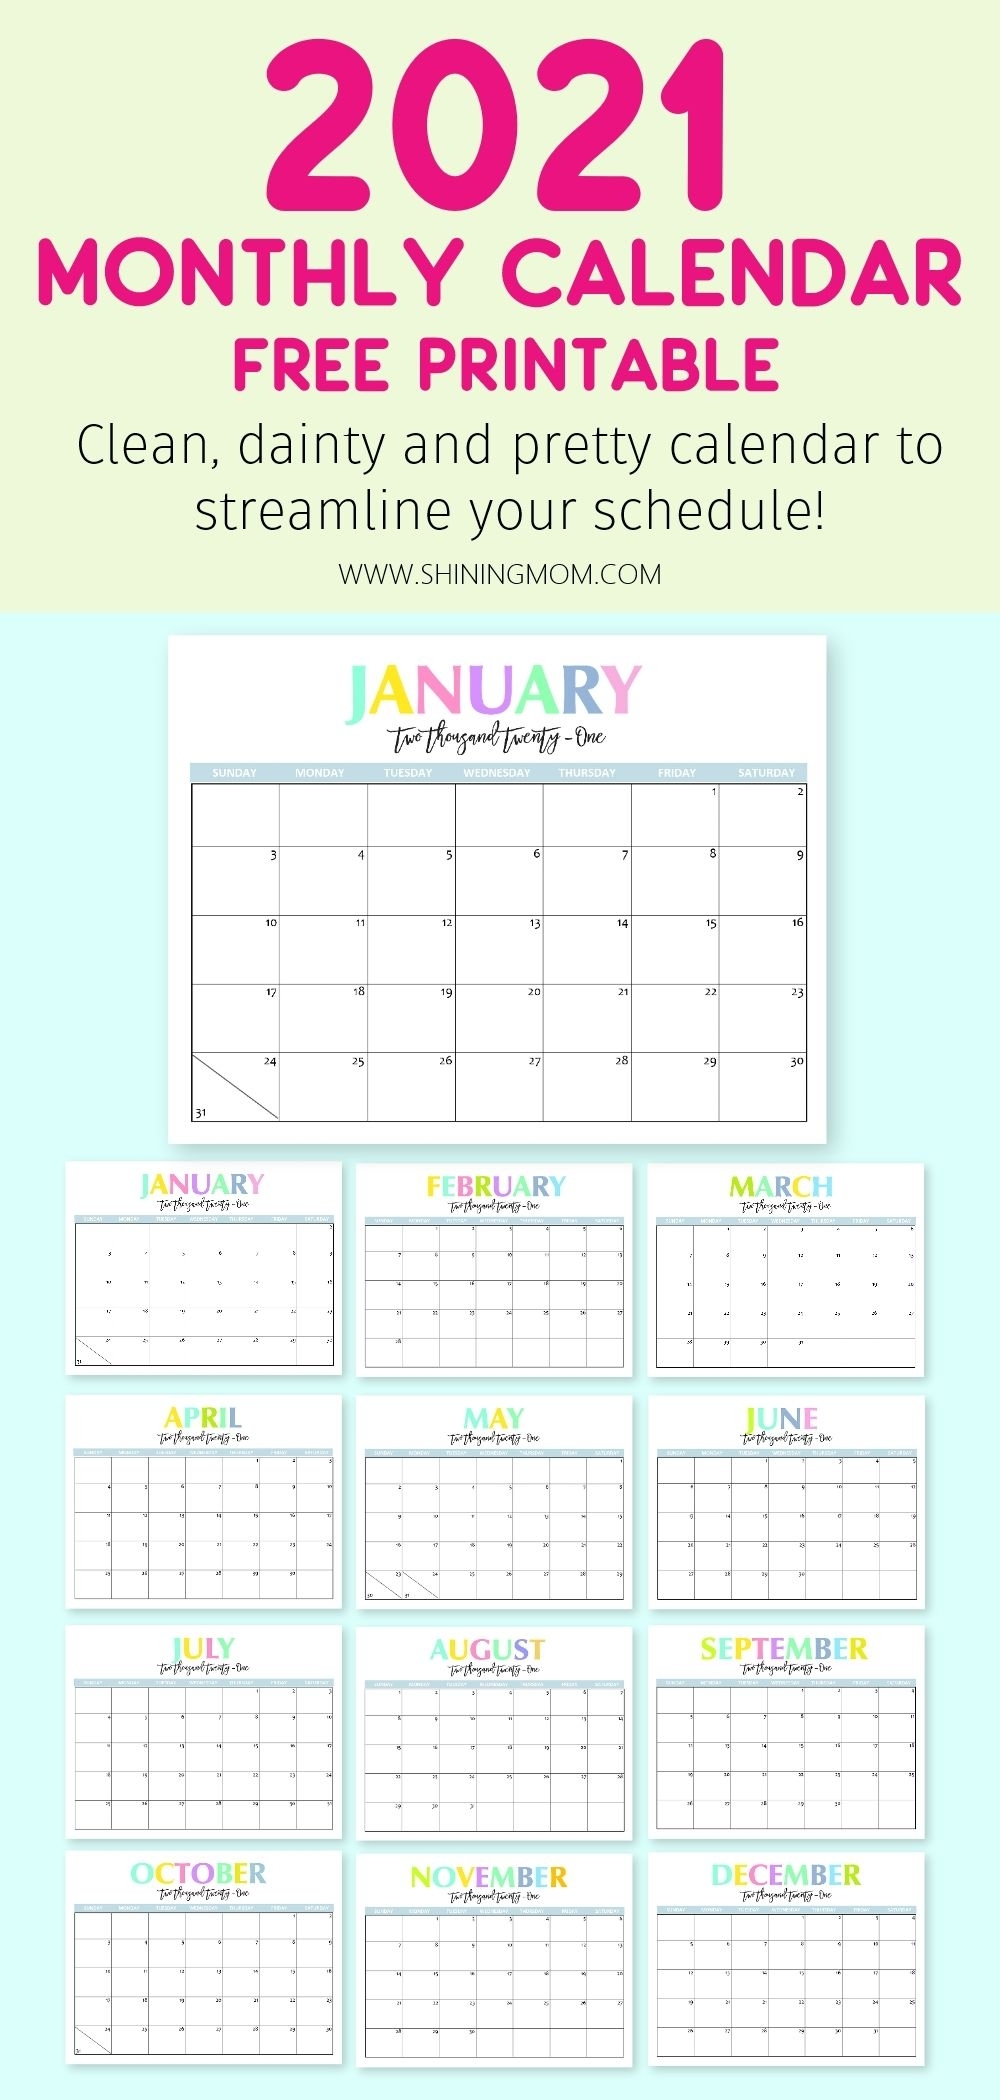 Free Printable 2021 Calendar: So Beautiful And Colorful! In